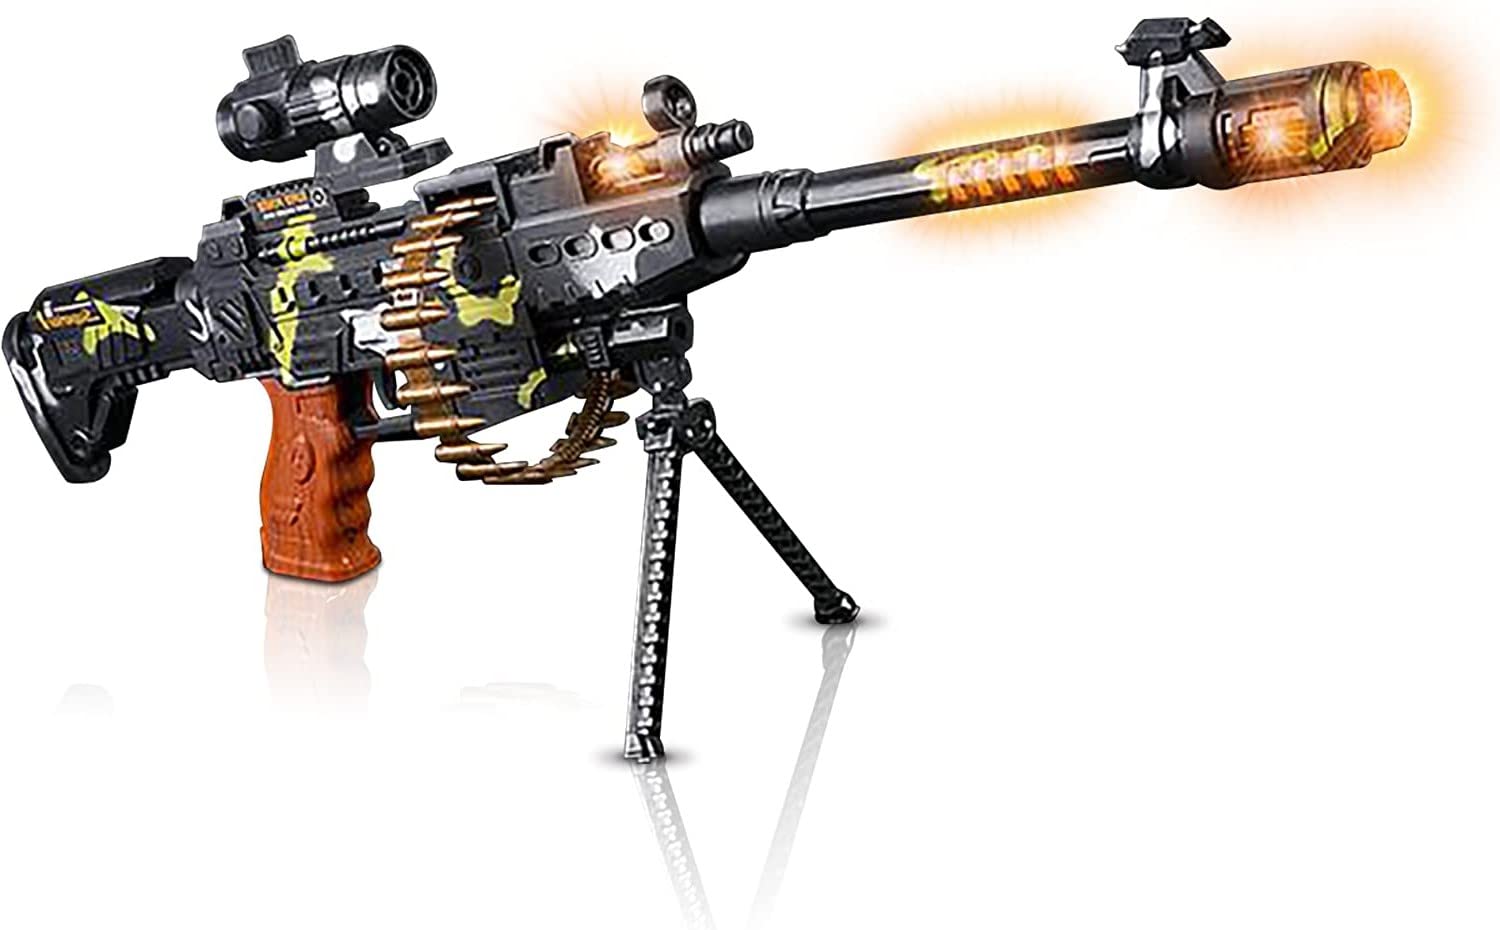 Toy Machine Gun with Scope, Stand and Realistic Sound Effects